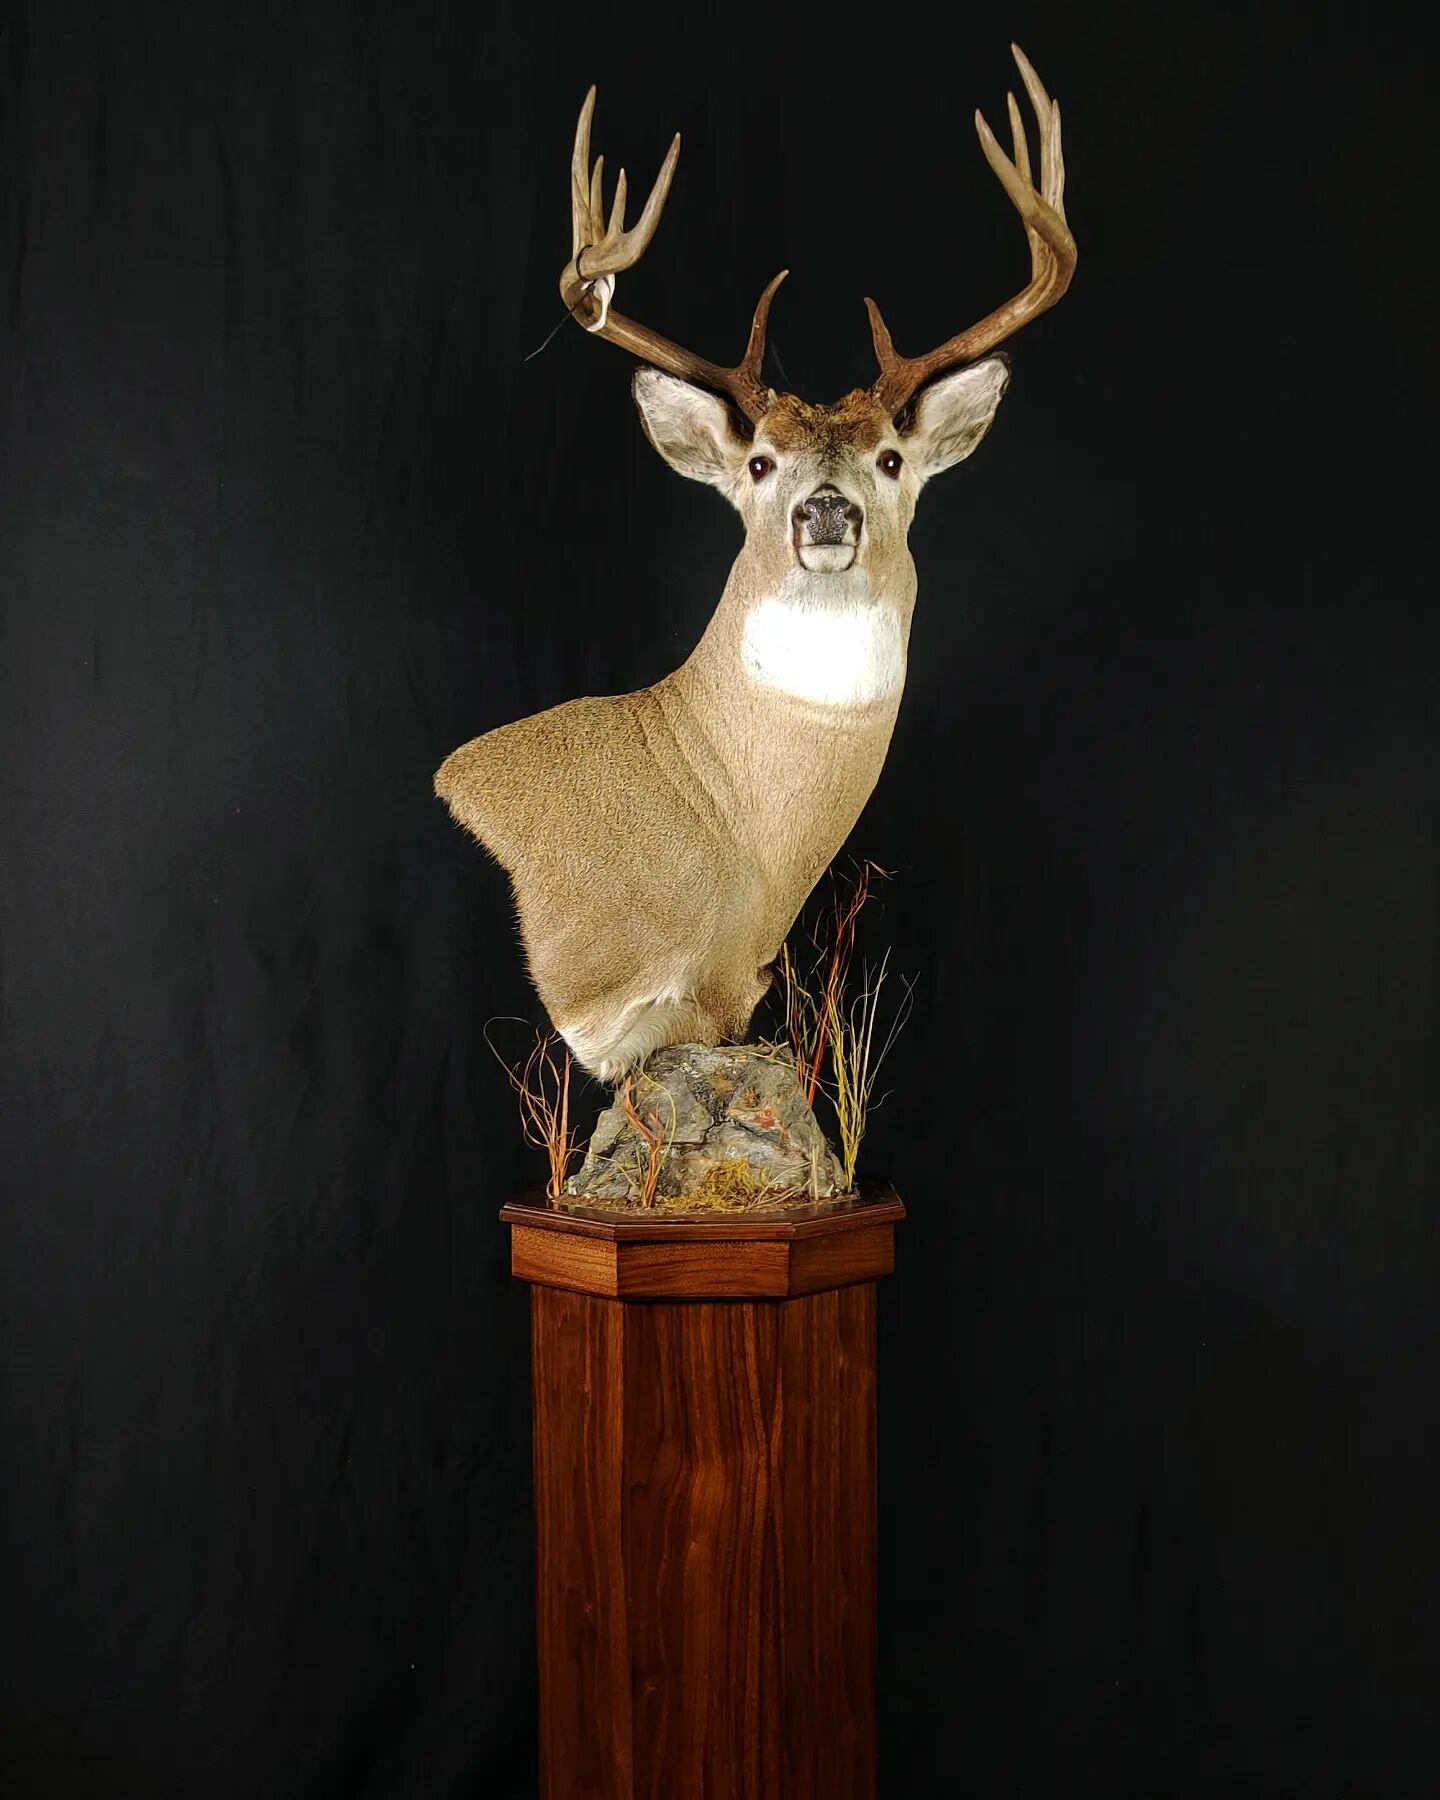 Beautiful whitetail pedestal finished up. #whitetailwednesday #whitetail #whitetaildeer #whitetailhunting #deer #biggame #idahotaxidermy #taxidermy